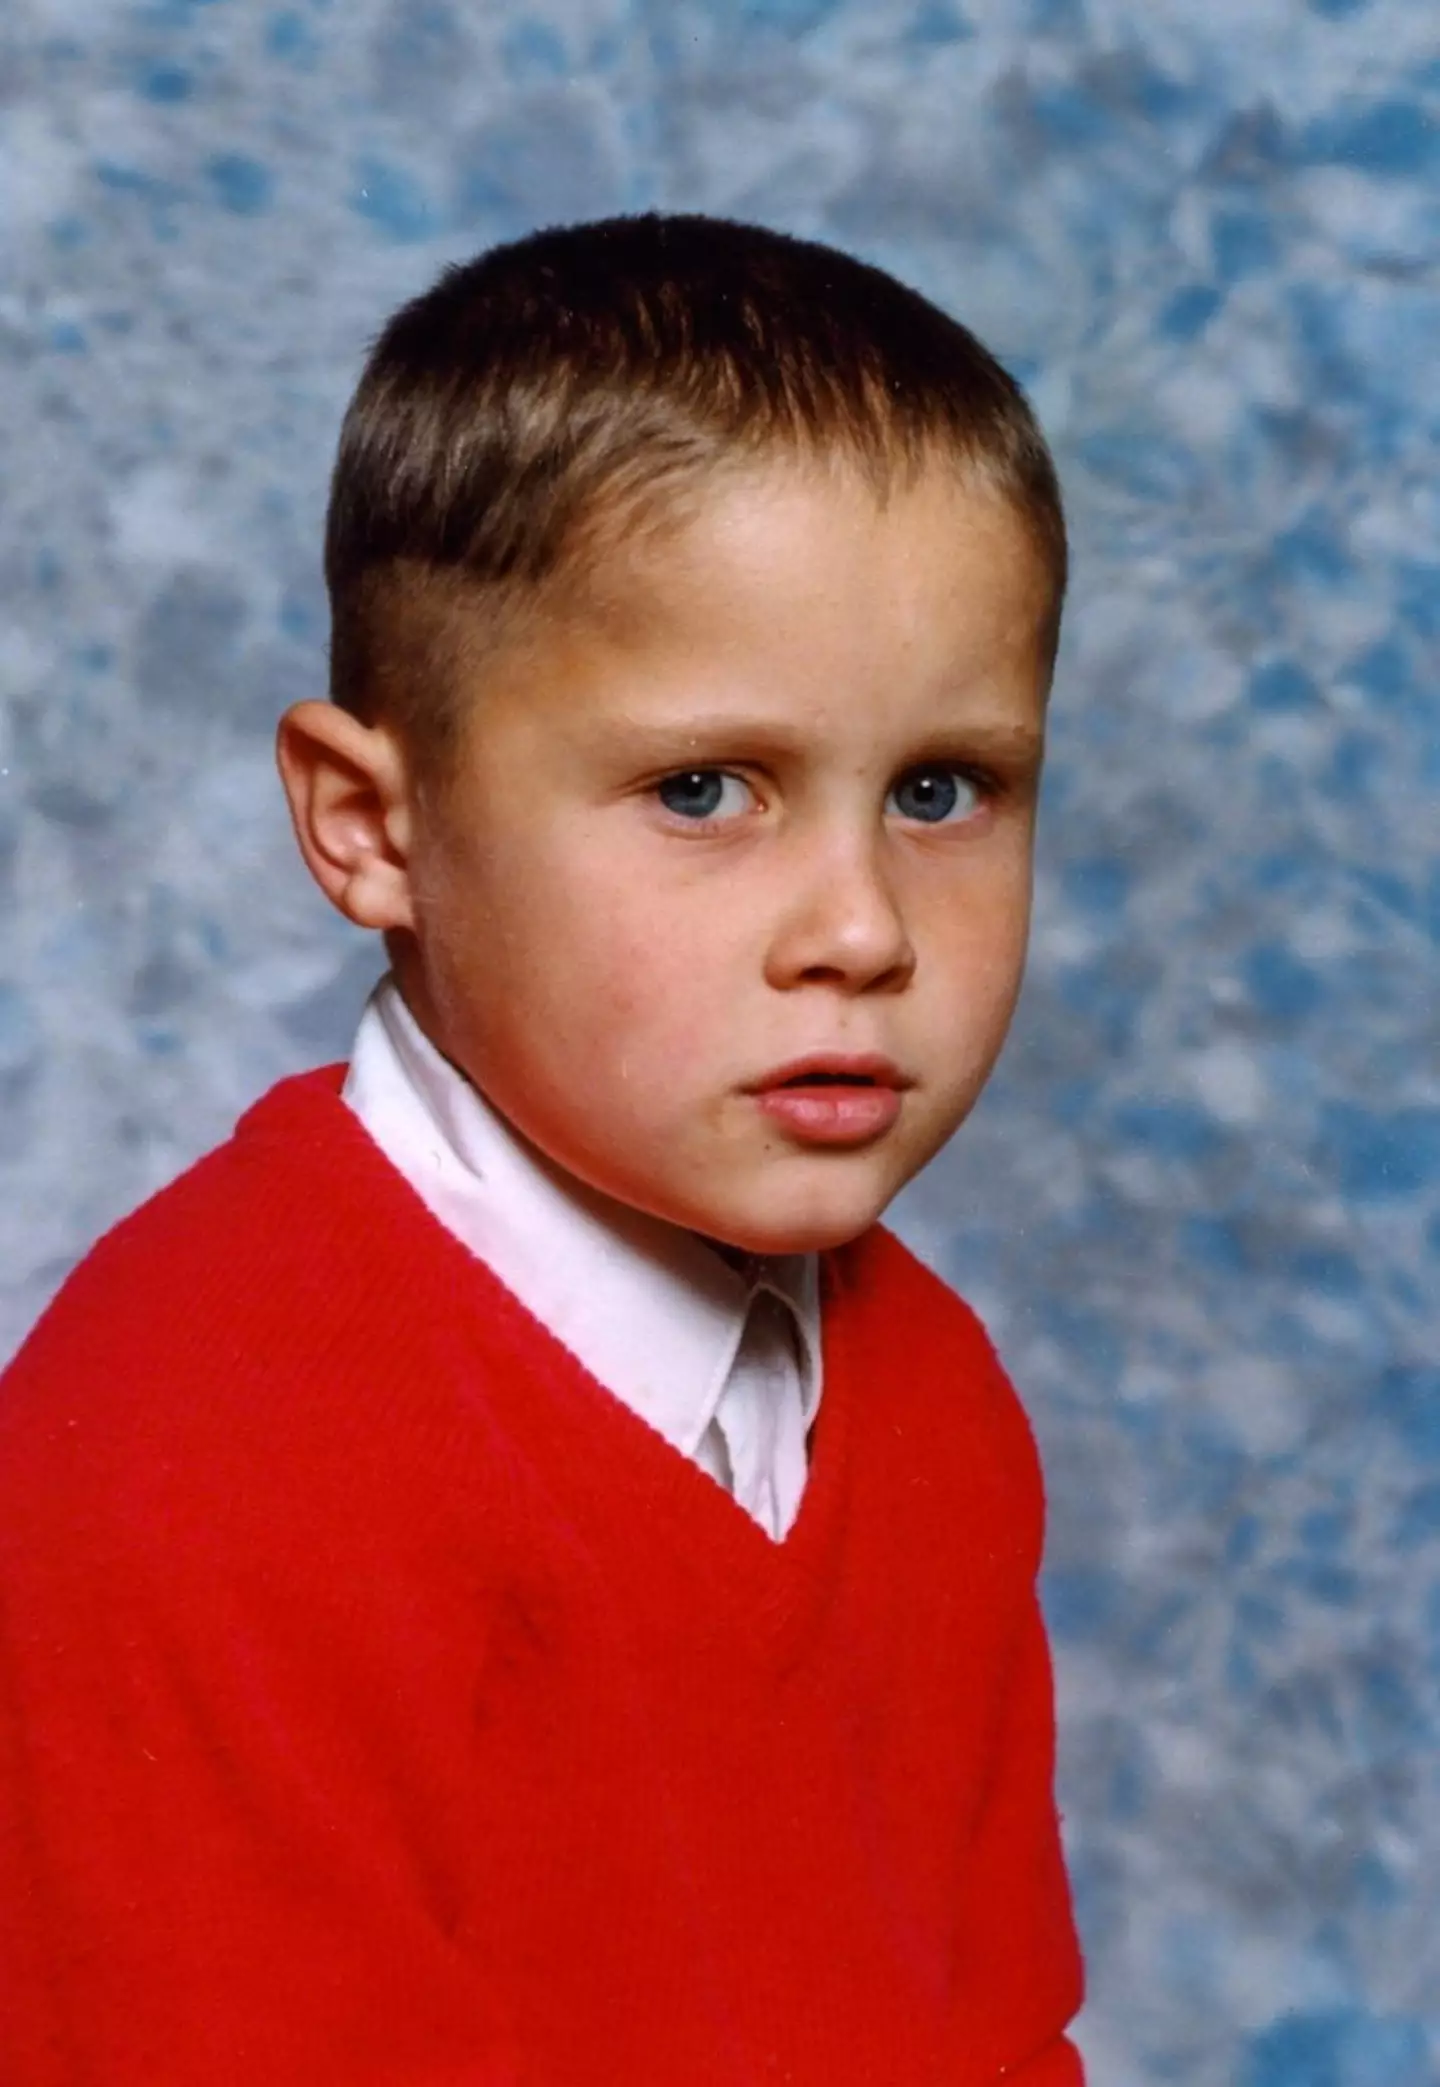 Rikki Neave disappeared in 1994 after he left for school one morning.